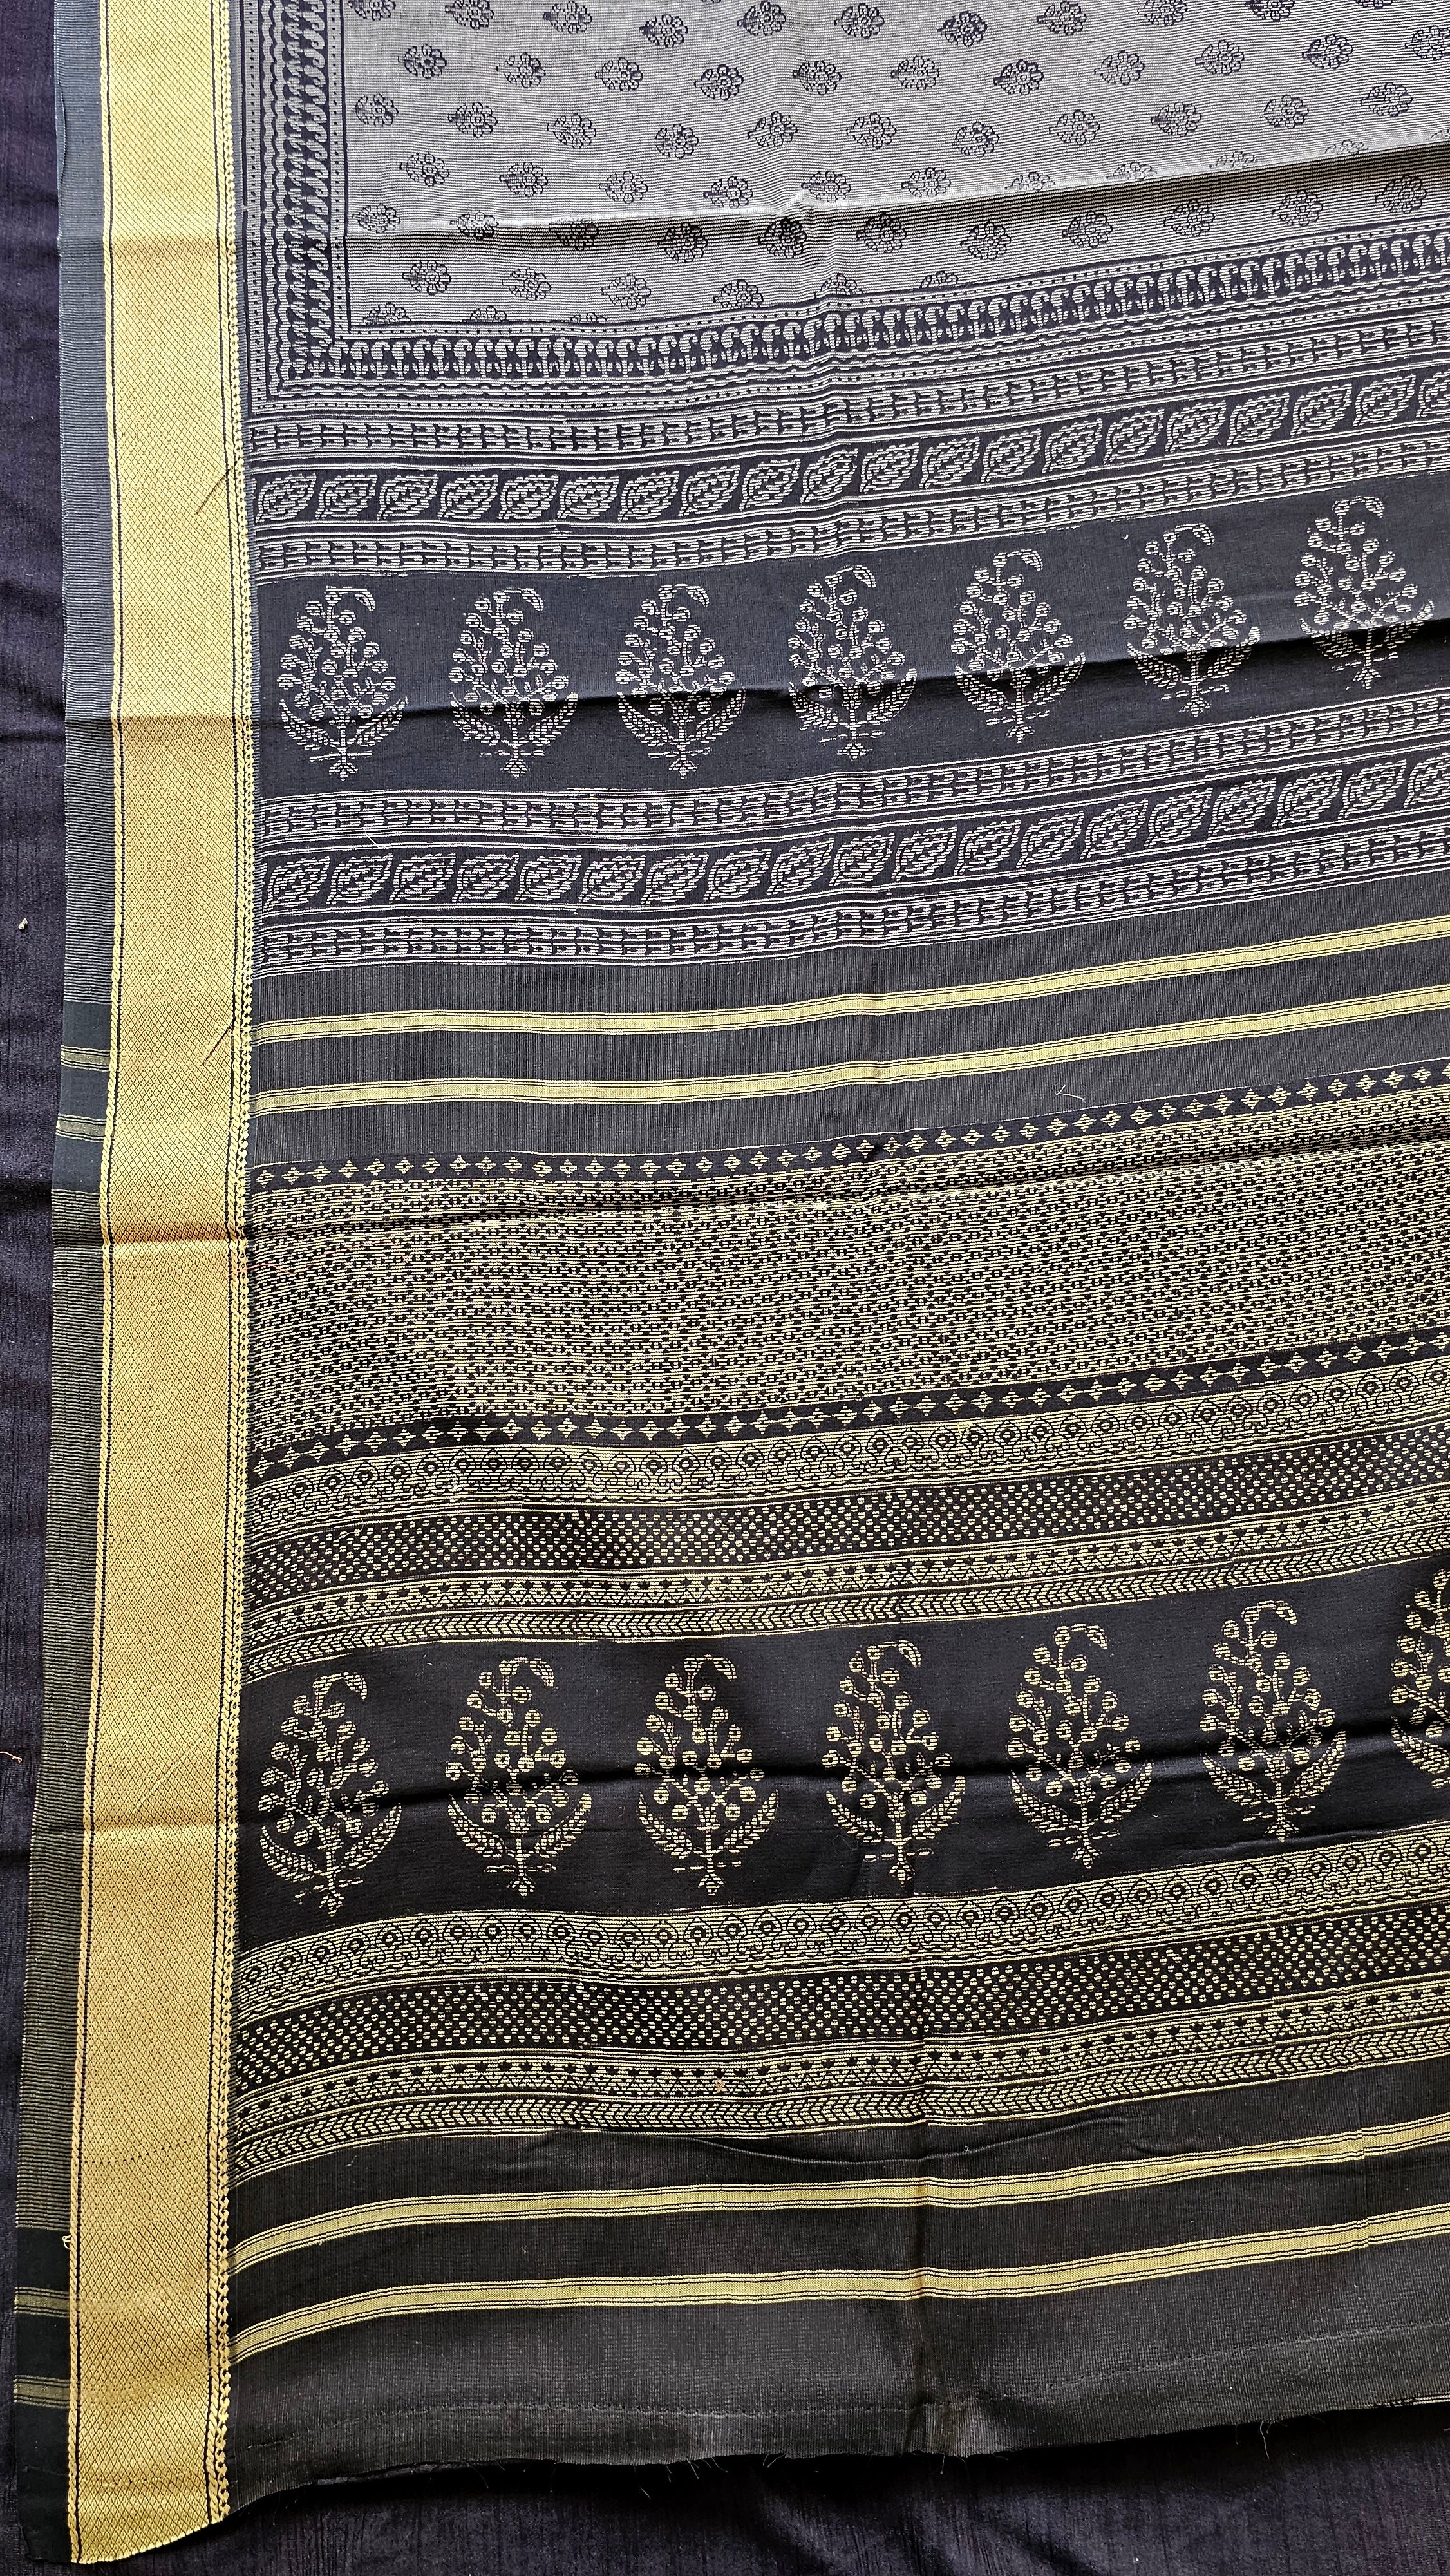 1×1 Weft Stripe Saree with Pale Yellow thread Chatai Borders and Bagh Prints.